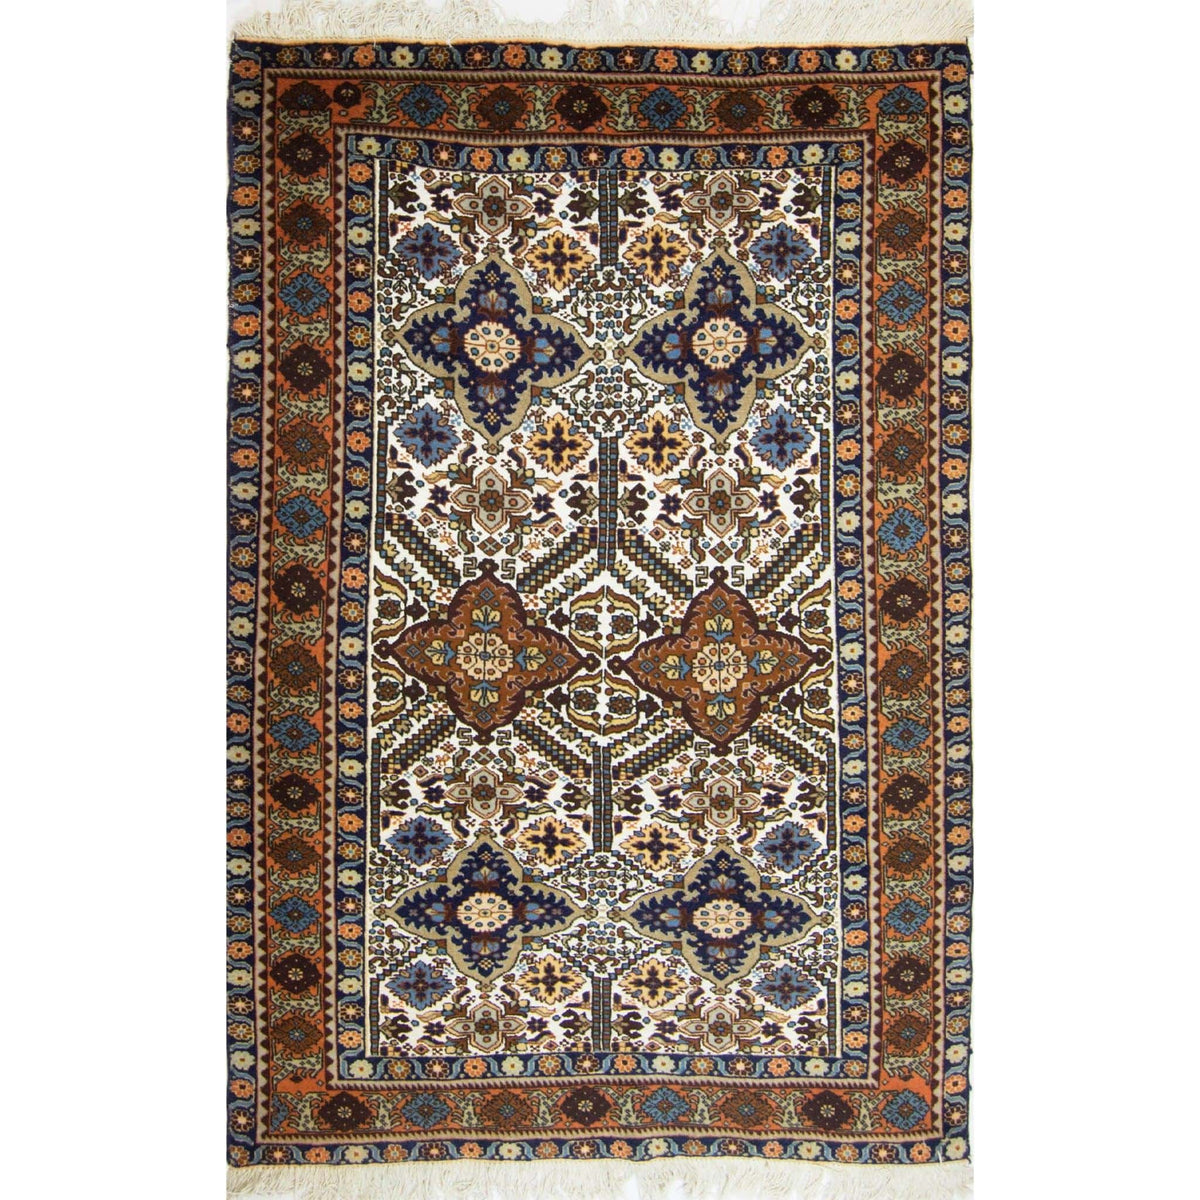 Super Fine Wool and Silk Hand-knotted Persian Ardabil Rug 133cm x 197cm